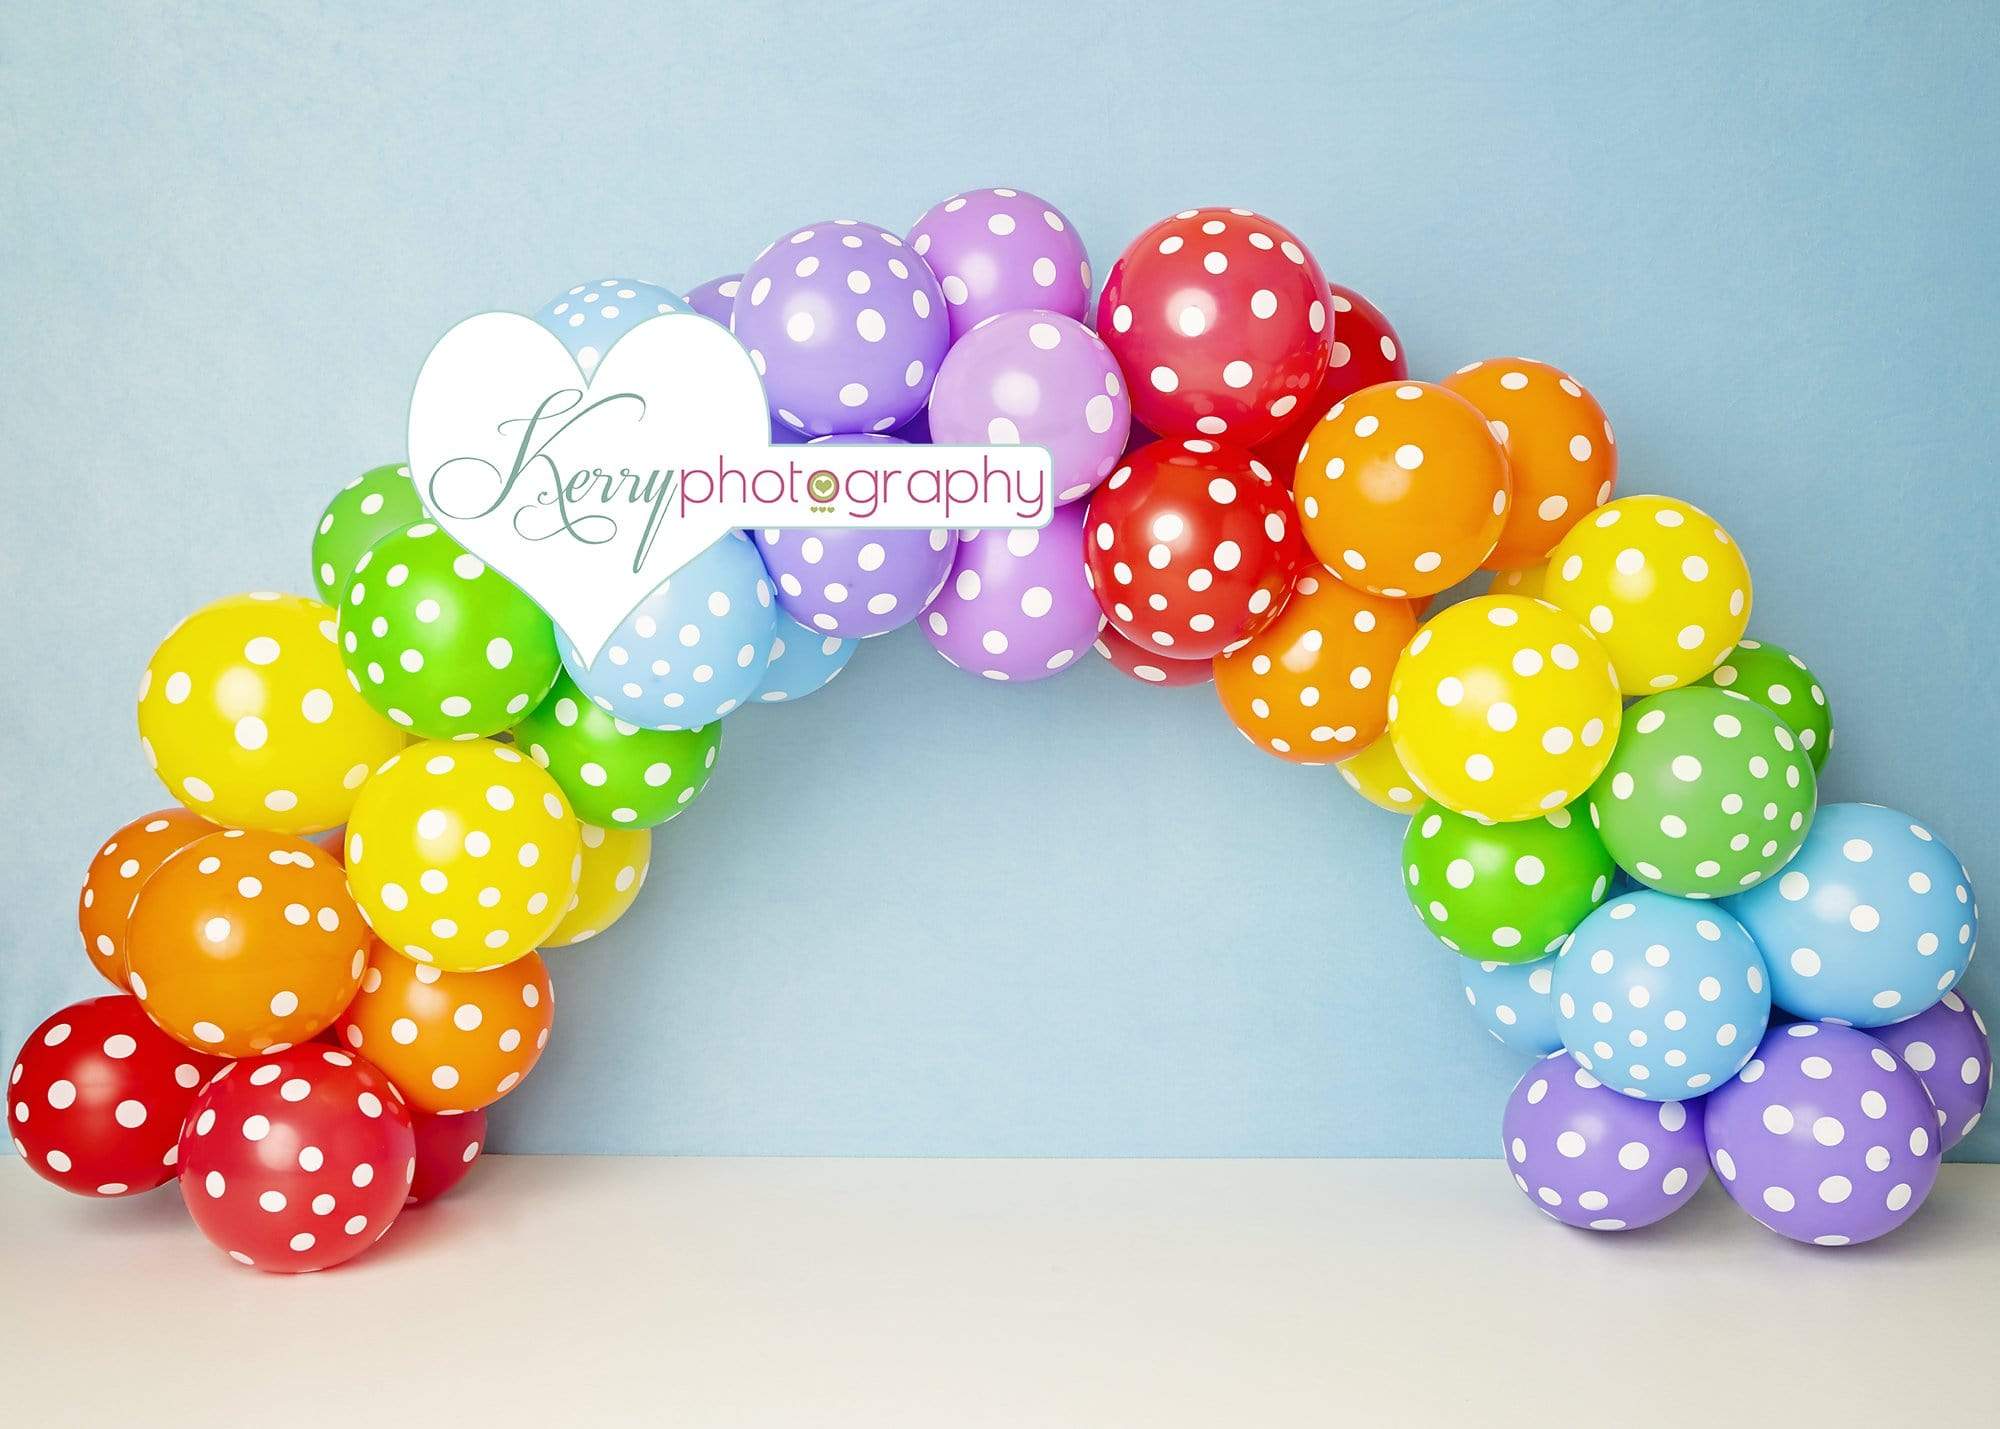 Katebackdrop鎷㈡綖Kate Balloons Rainbow for Children Backdrop for Photography Designed by Kerry Anderson